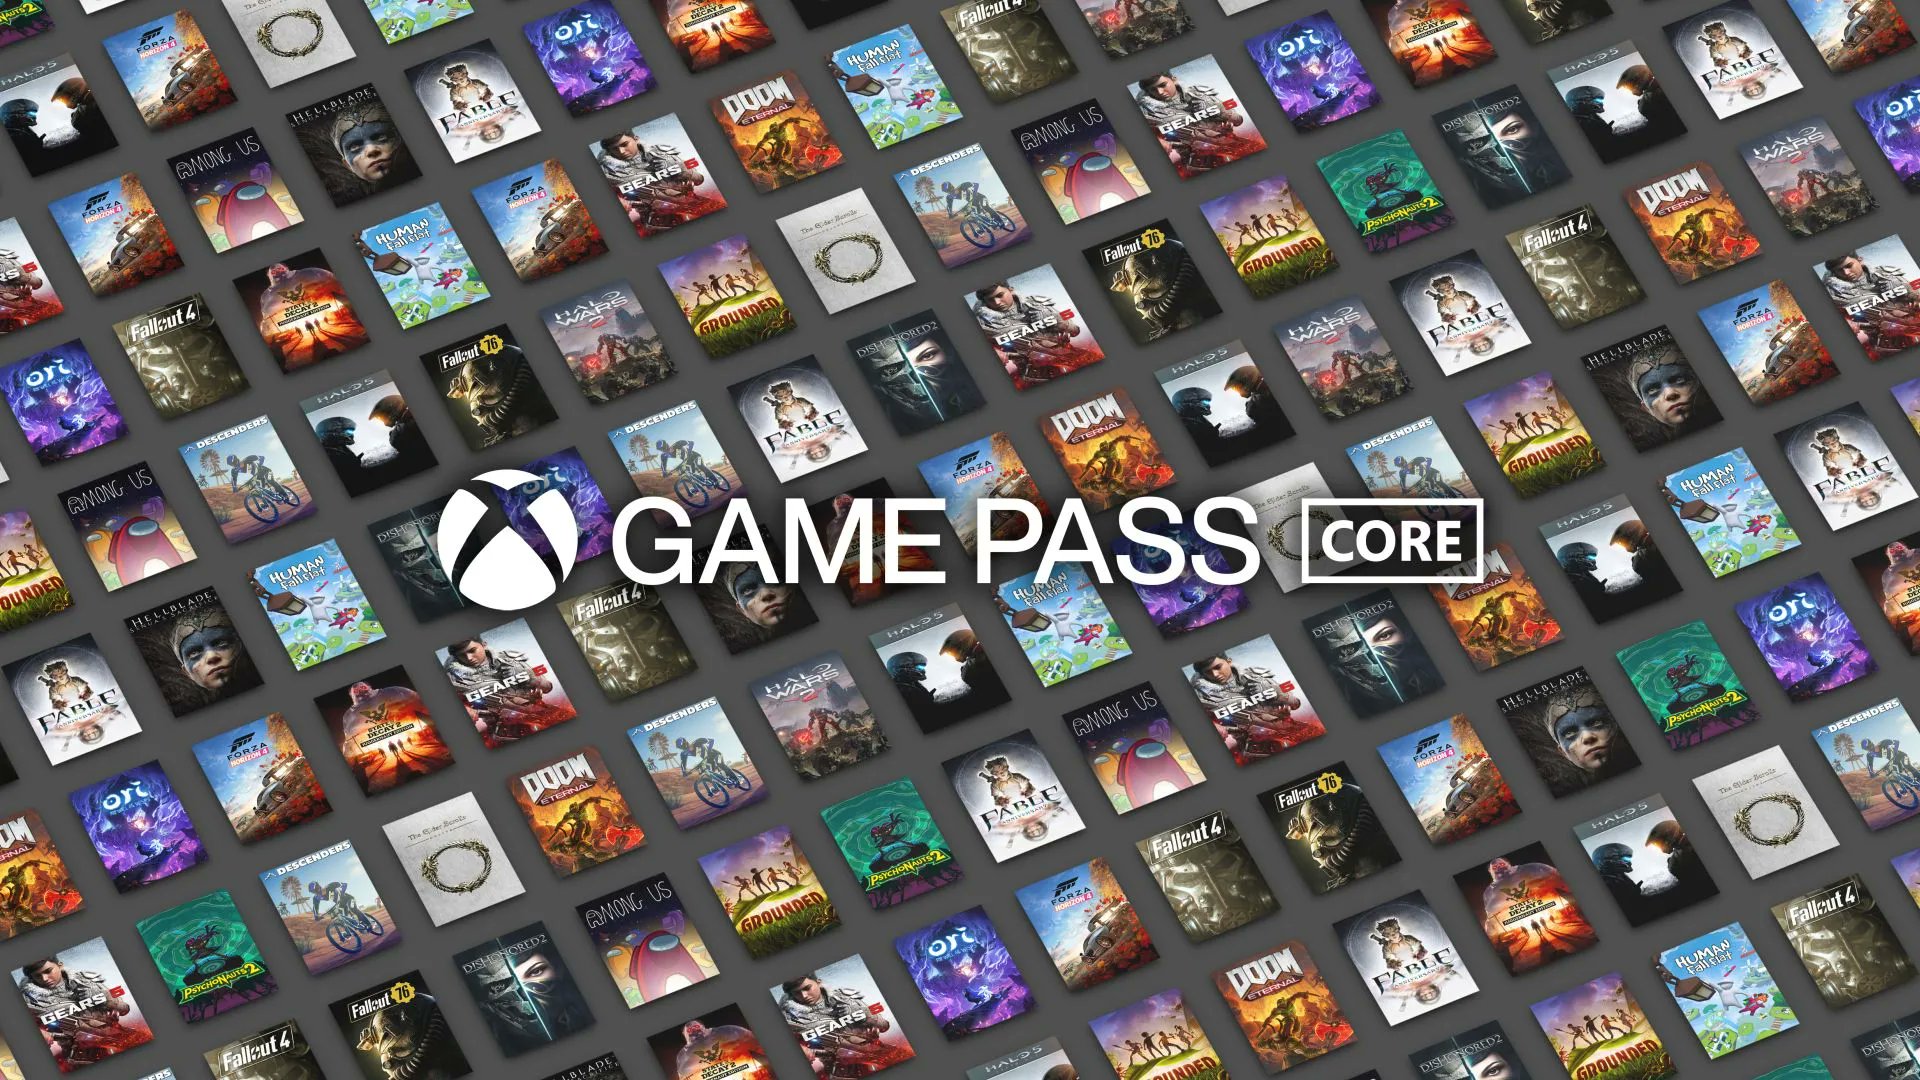 September Xbox Game Pass titles announced